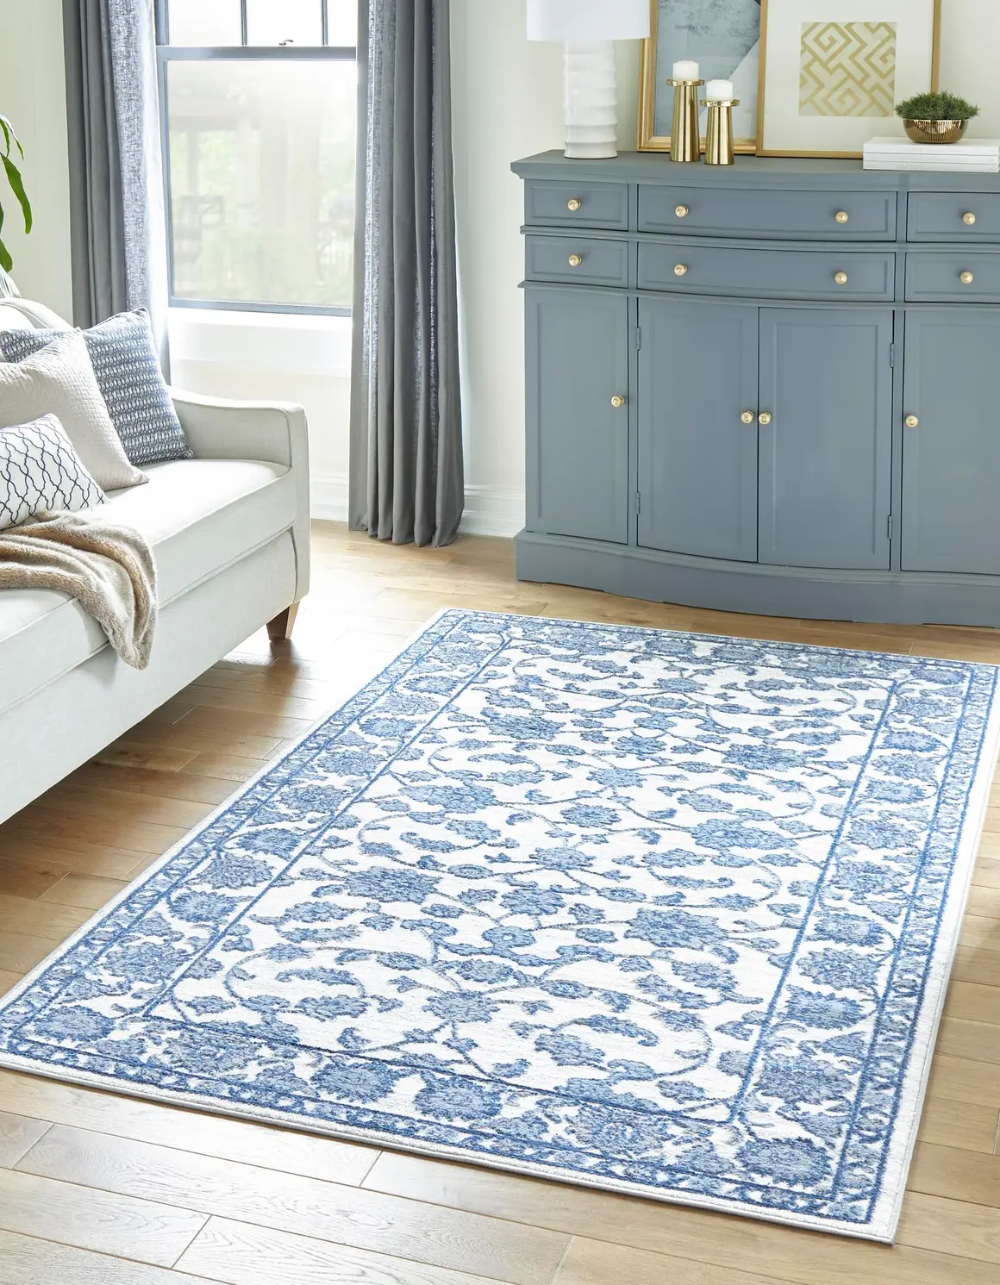 The Psychology of Blue: How Blue Rugs Can
Impact Your Mood and Space